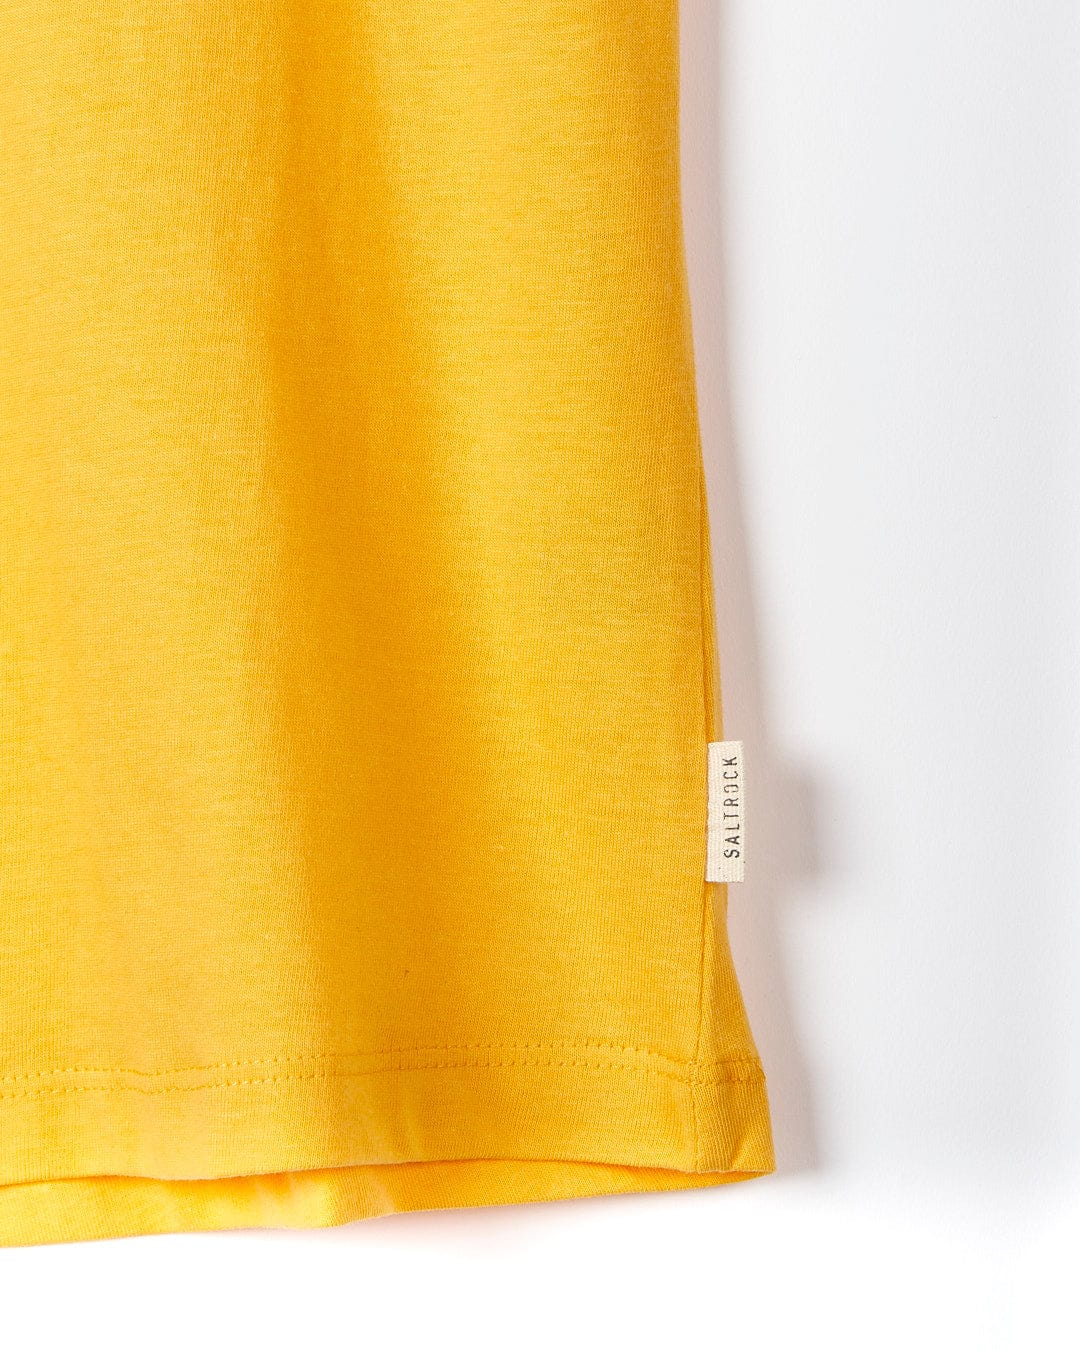 A Saltrock On The Road Cornwall - Womens Short Sleeve T-Shirt - Yellow hanging on a white wall.